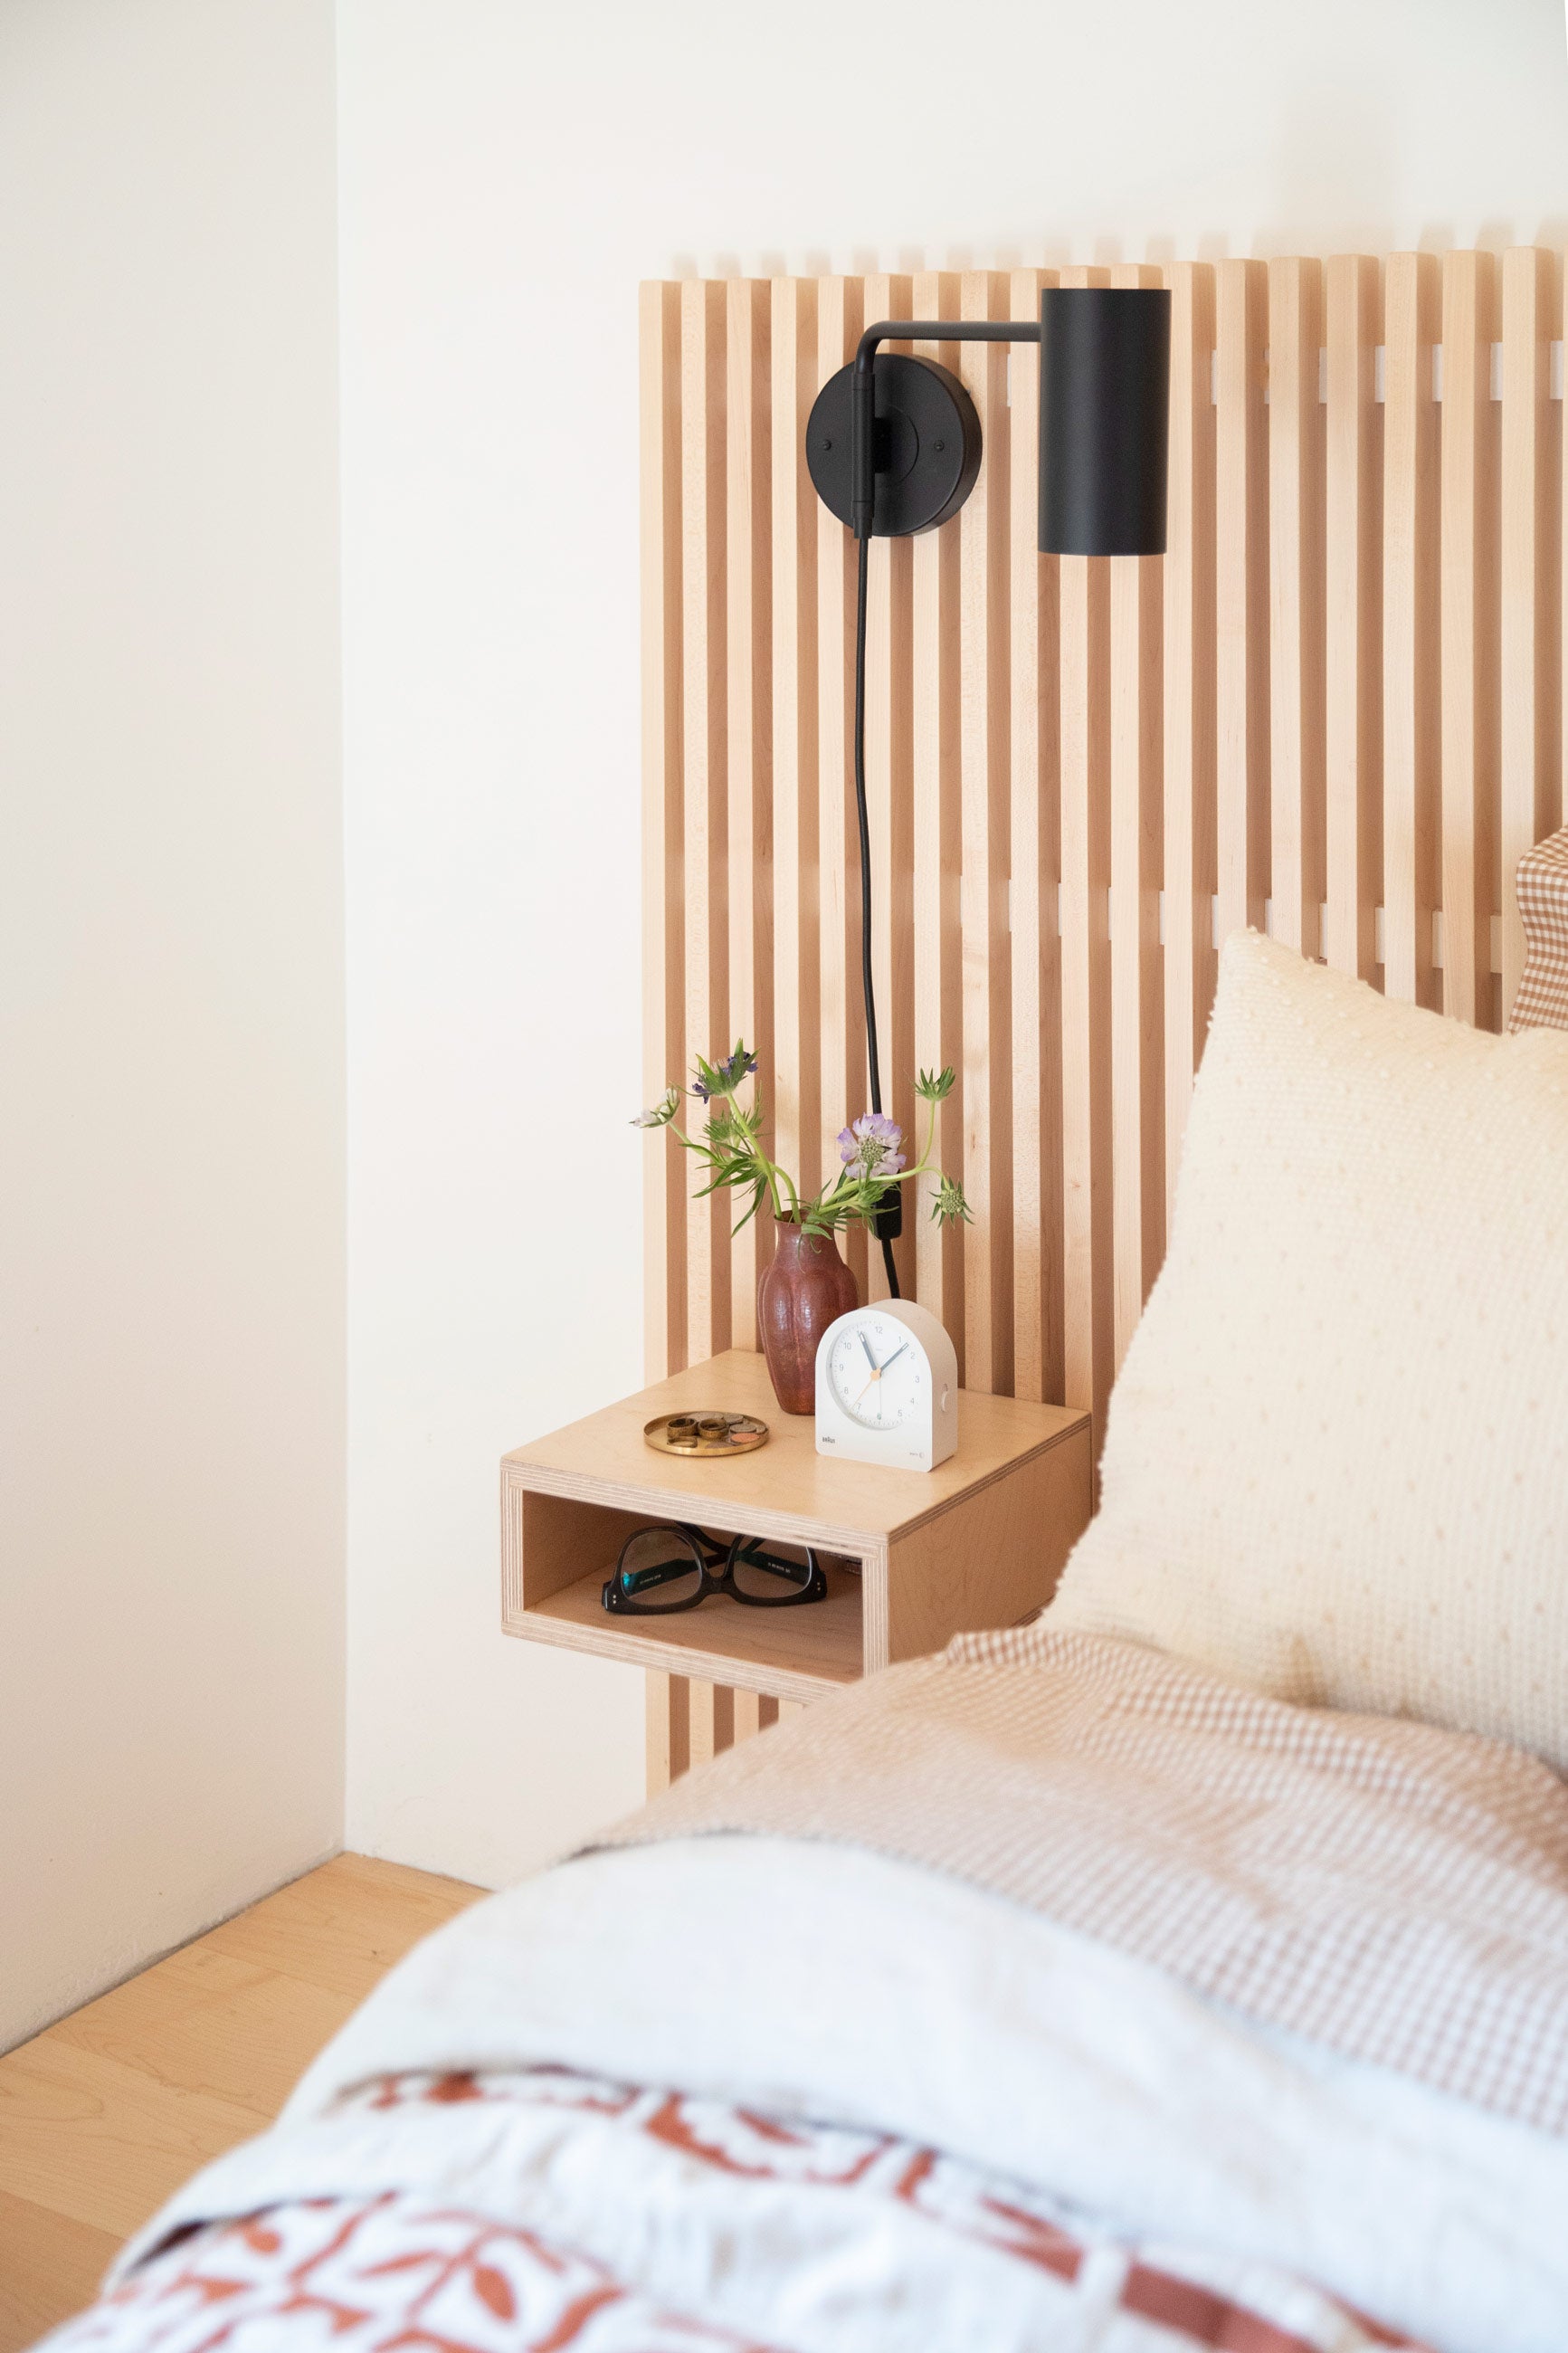 Bedside table with small white clock, vase full of fresh flowers, and black wall sconce.